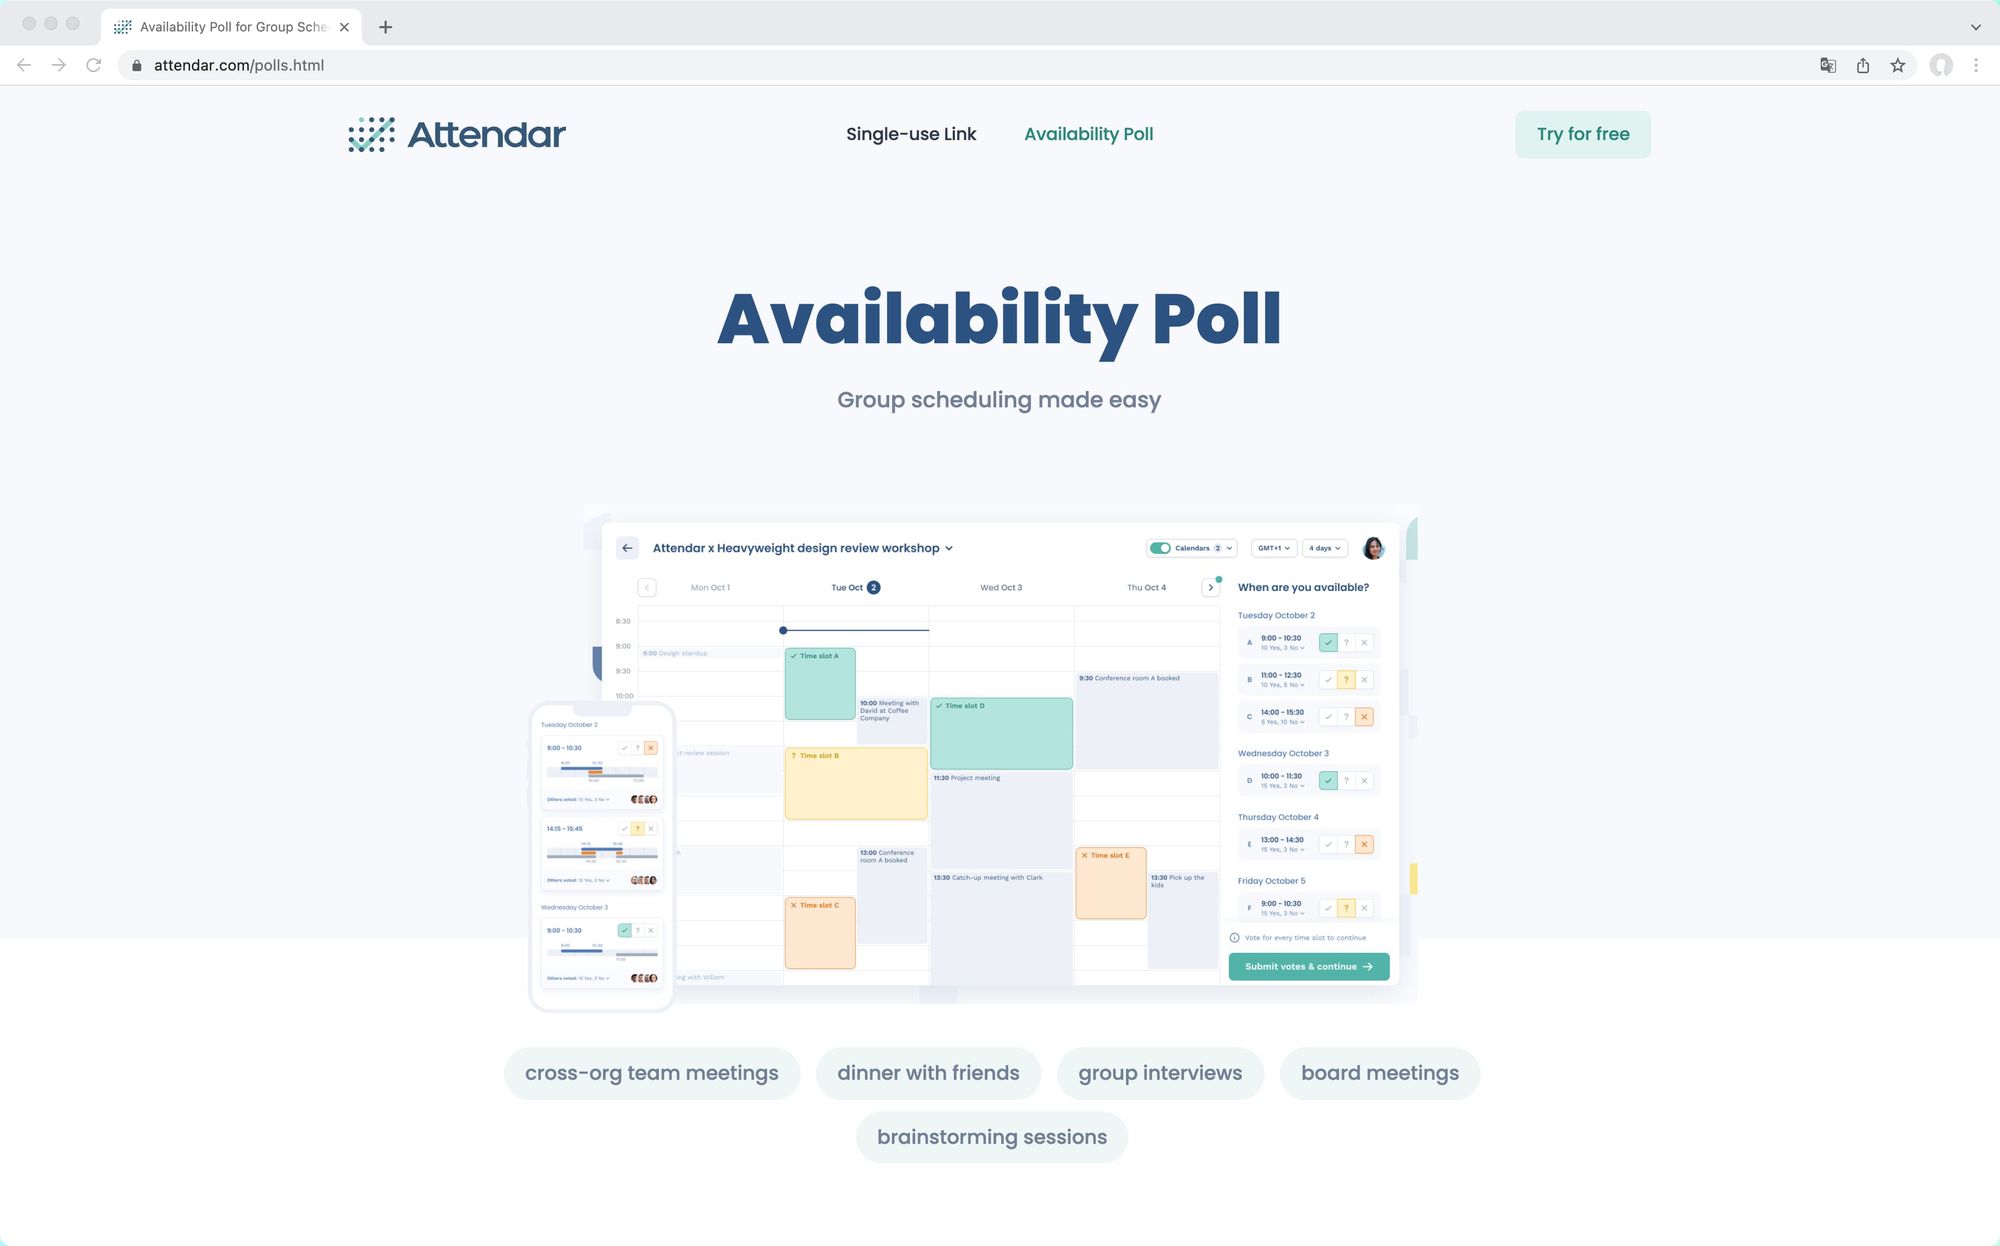 How to create Availability Poll with Attendar (it's free)